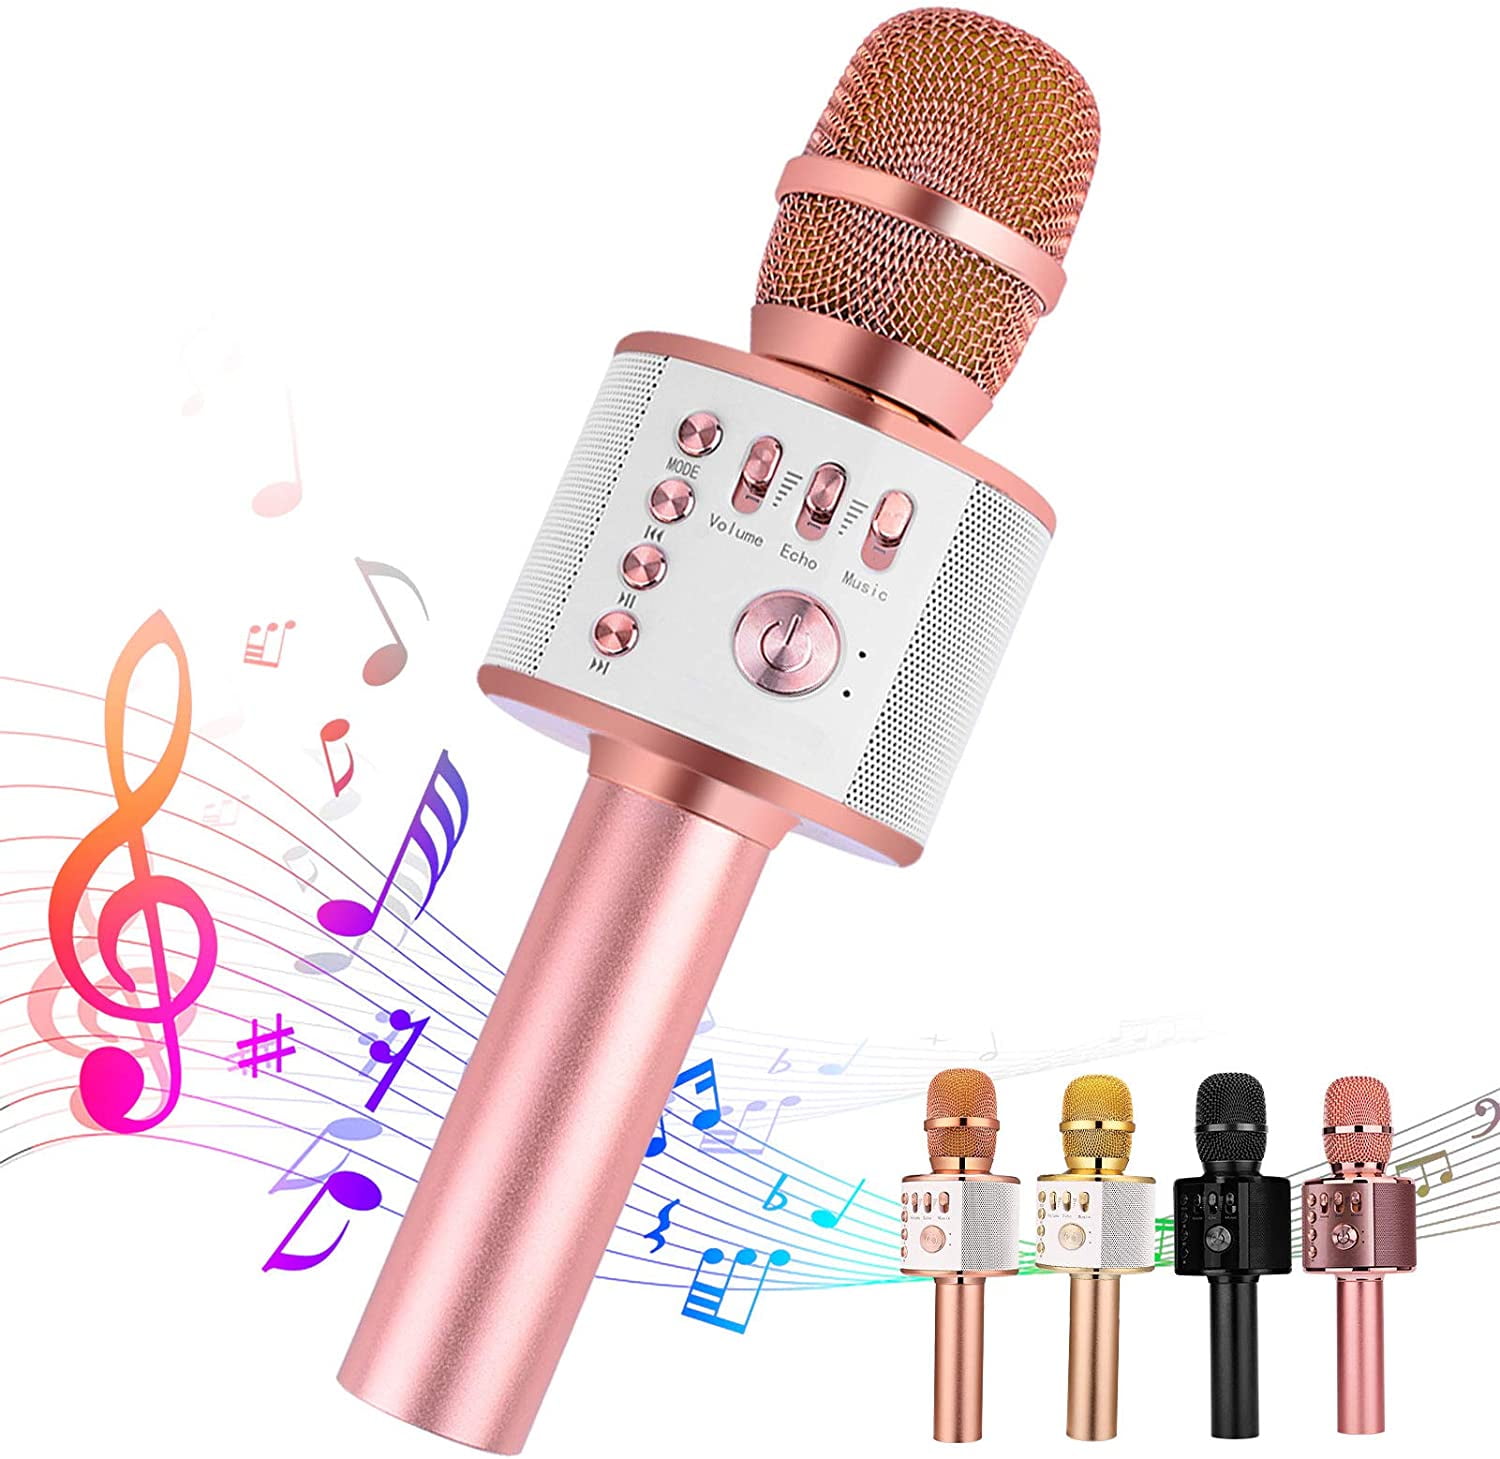 Wireless Microphone,Karaoke machine Portable Bluetooth Microphone with Speaker Handheld Microphone for Home Party Singing and Conference Compatible with Android and iOS Devices